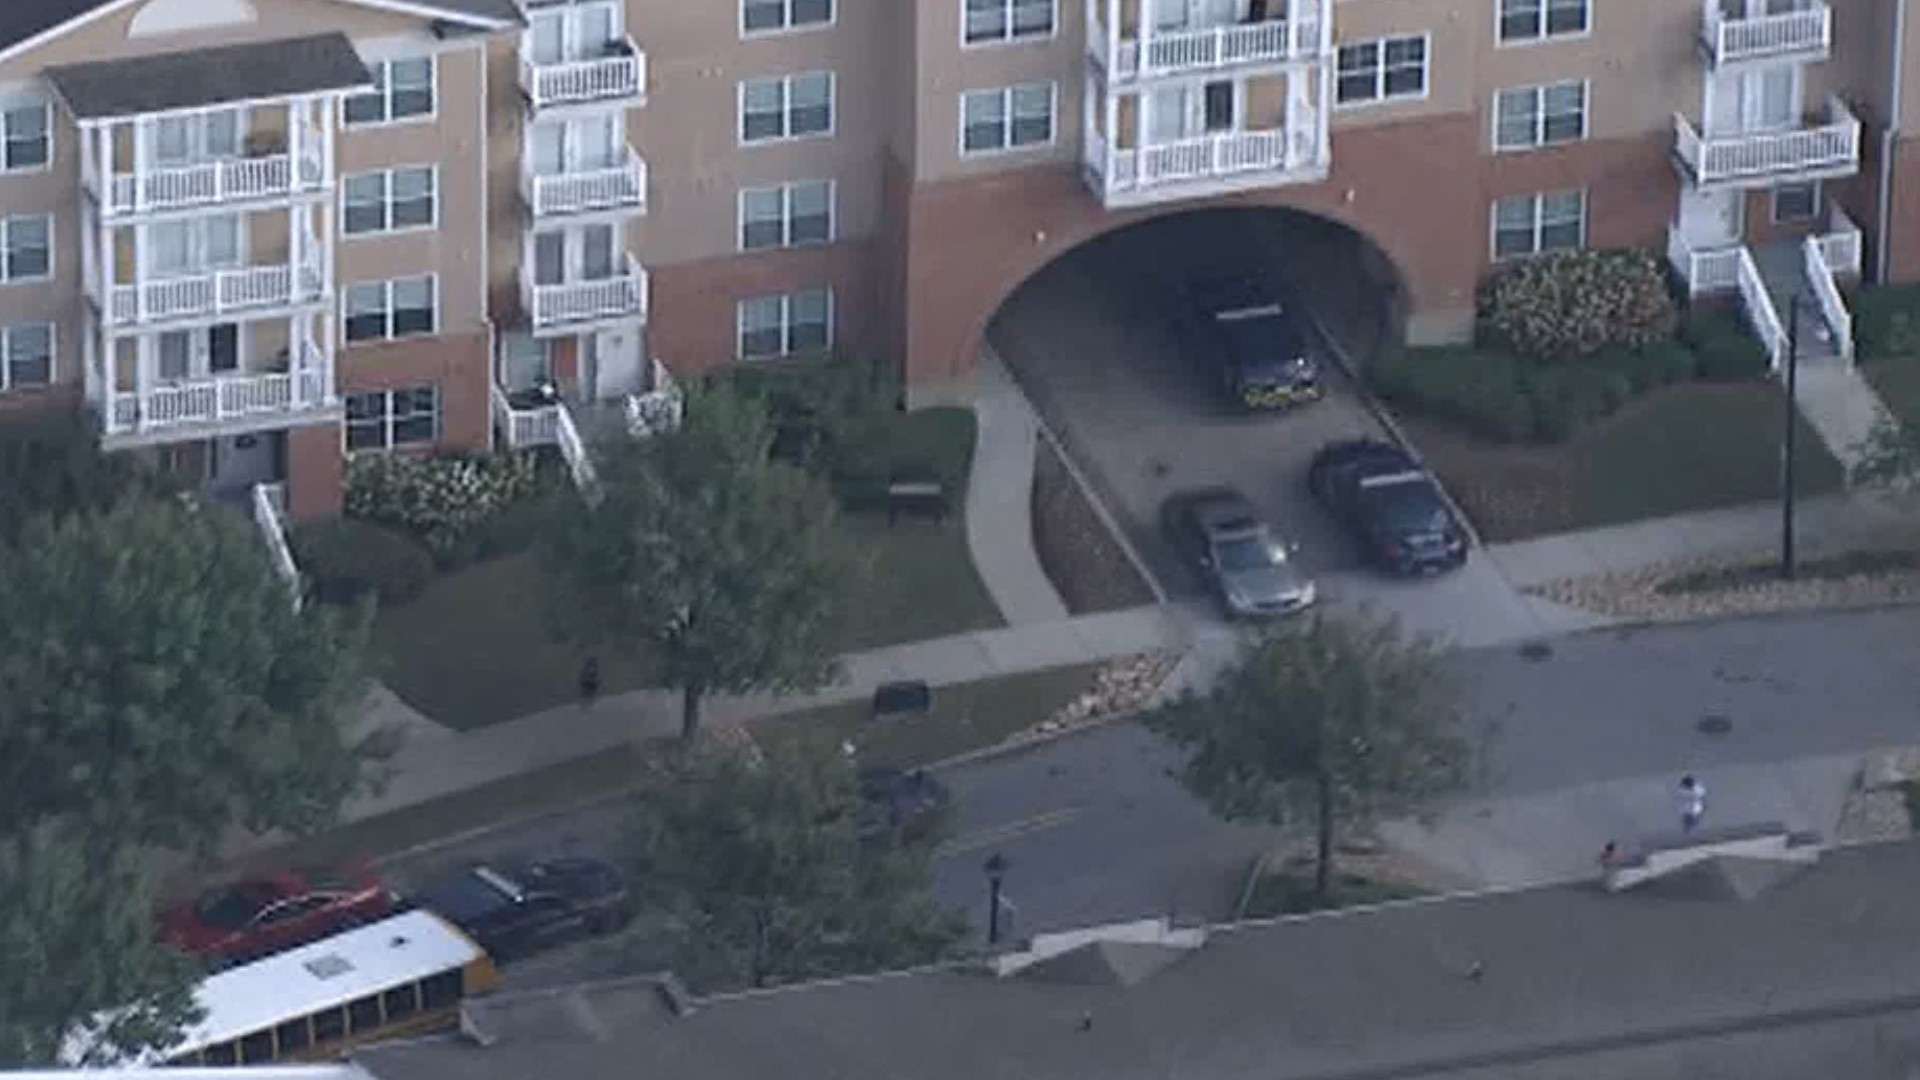 Authorities said the shooting took place at the Sorelle Apartments at the 2399 block of Parkland Drive NE.